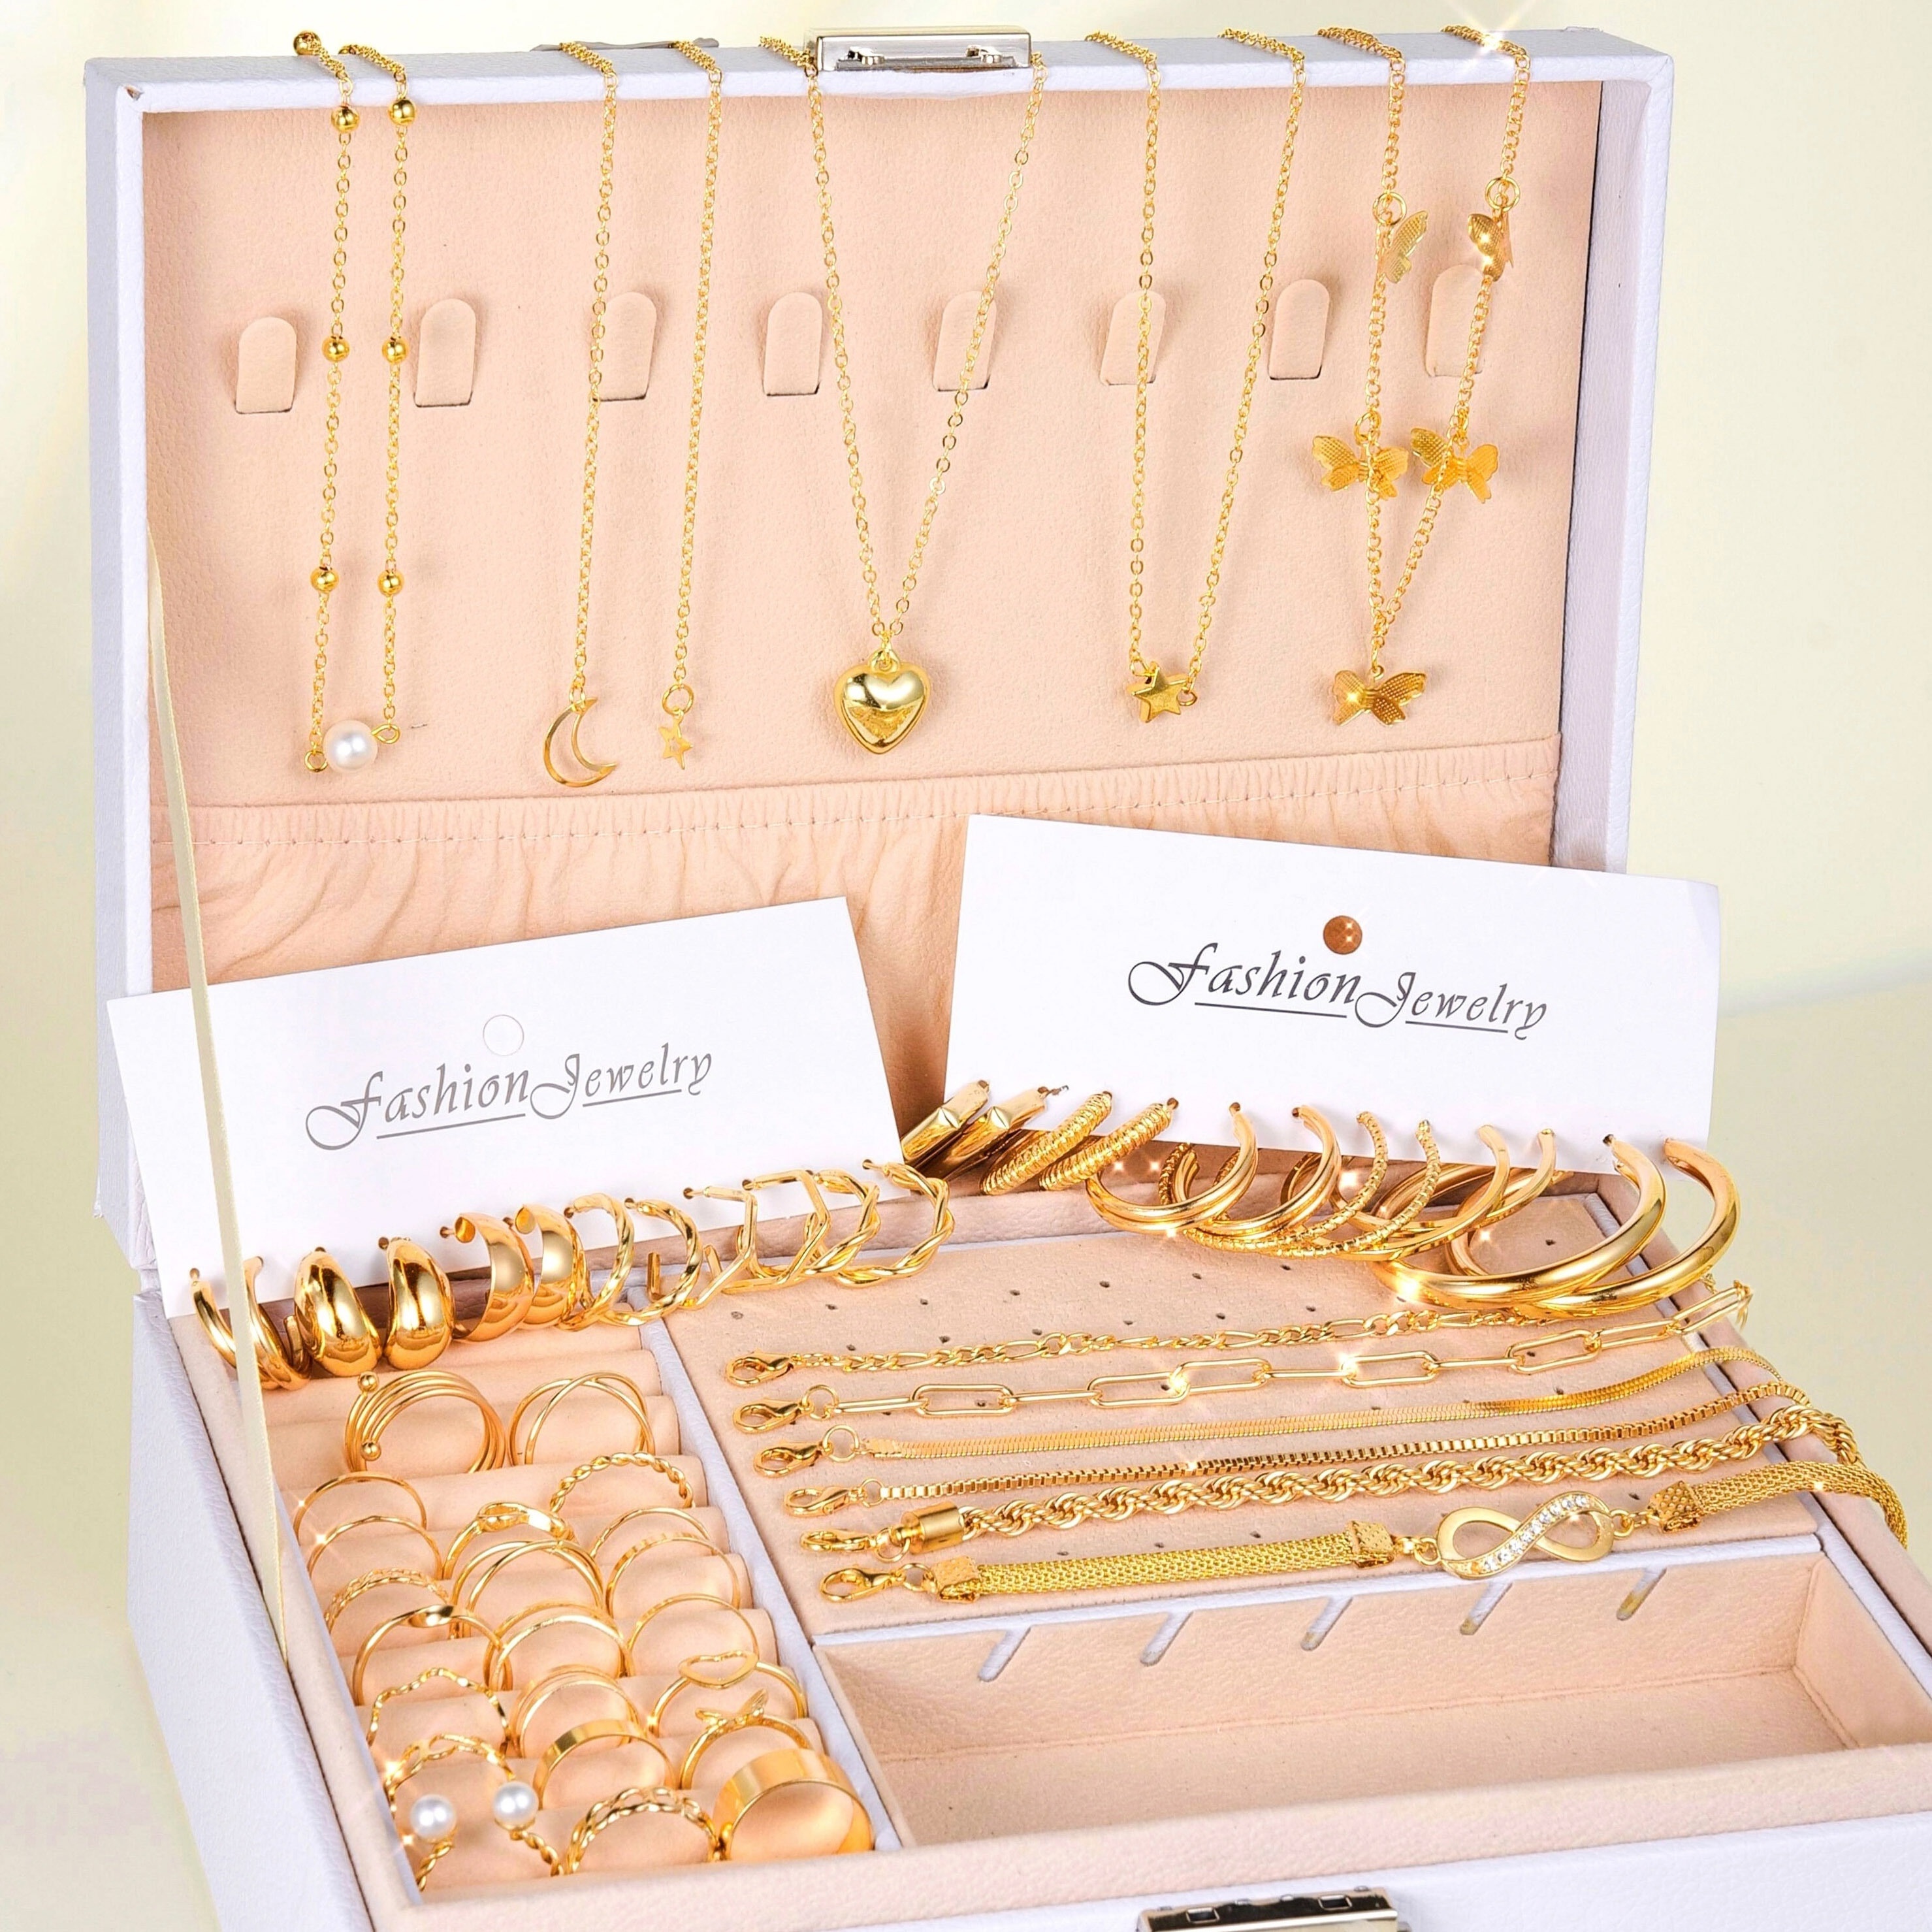 

57pcs/set Necklaces + Earrings + Rings + Bracelets + Anklets Chic Jewelry Set Multi Styles For U To Mix And Match Casual Jewelry For Daily Routine ( No Box )